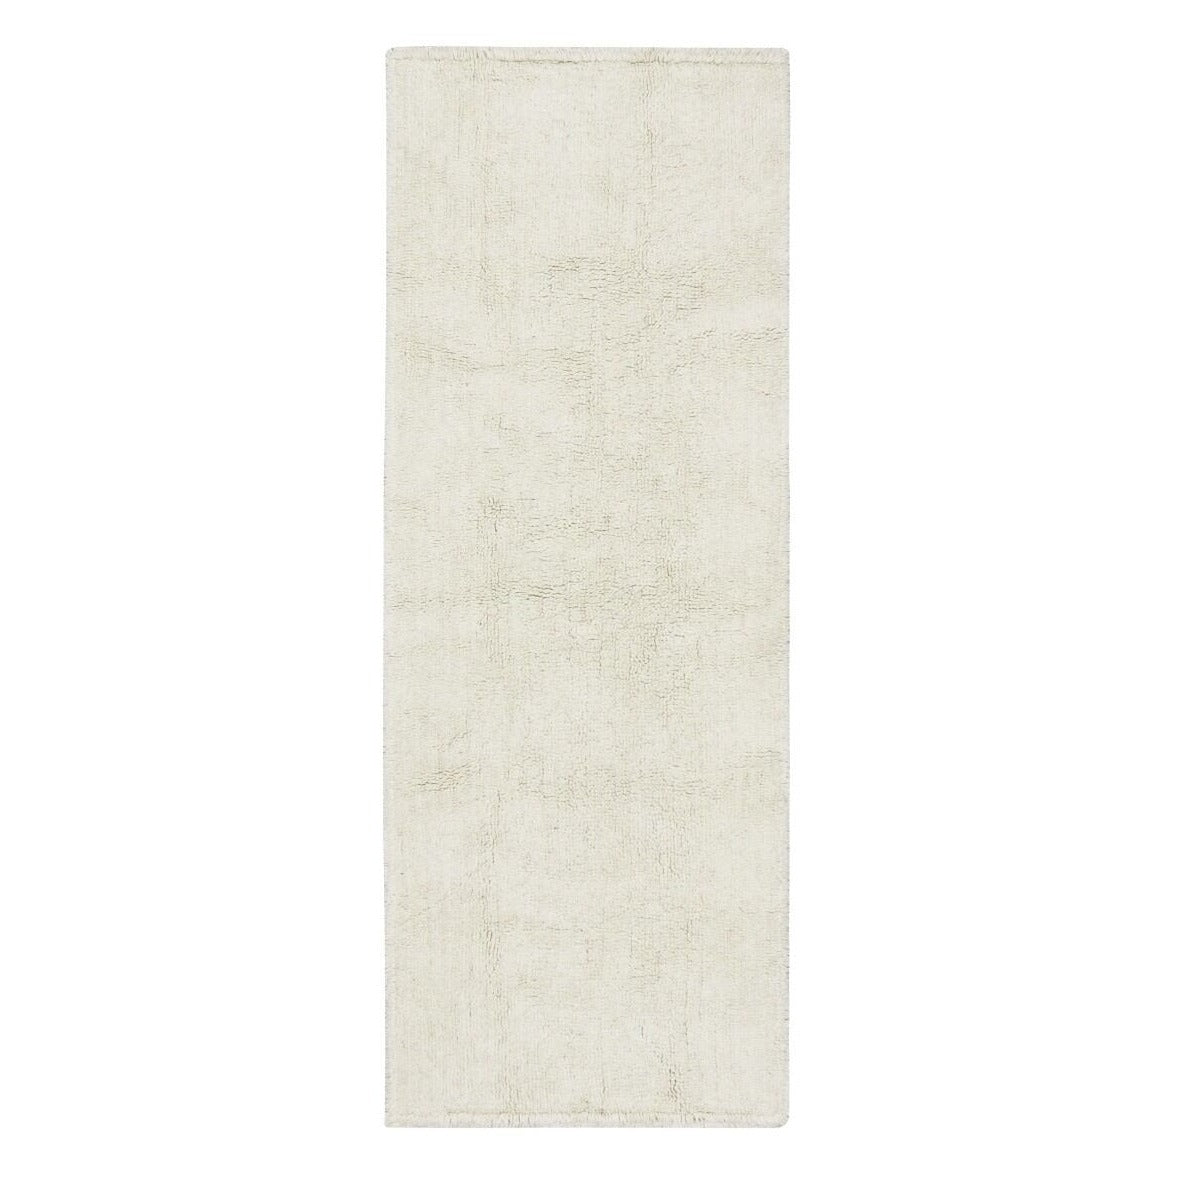 Lorena Canals Woolable Silhouette Rug - Runner - Natural